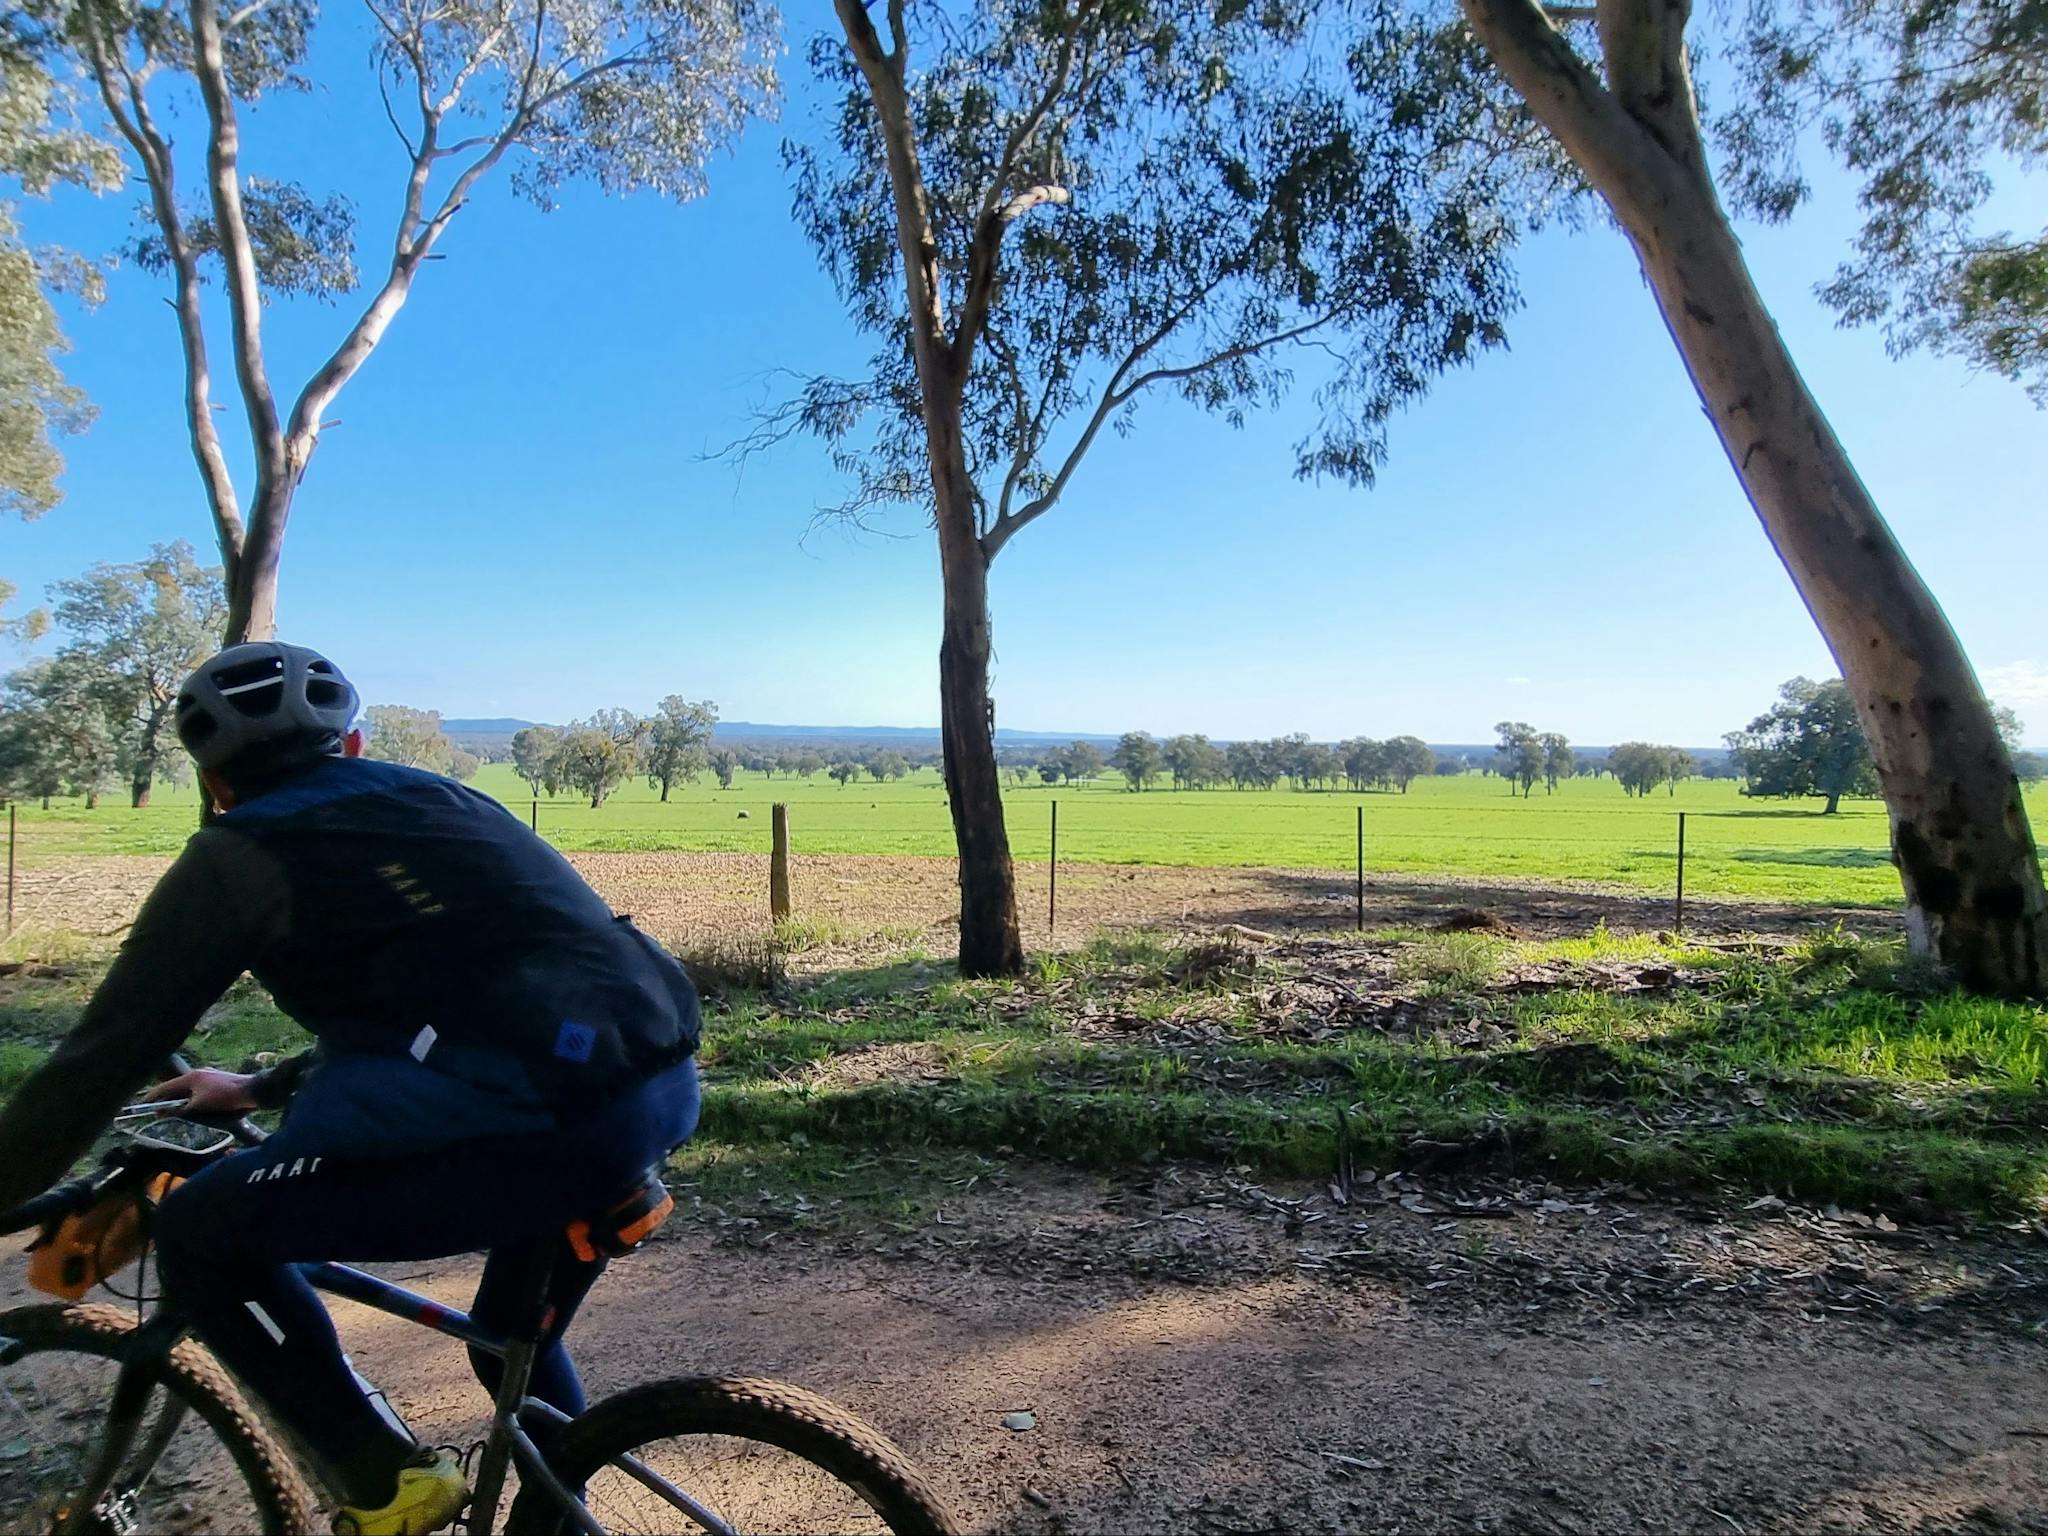 Cyclist on Gravel Road looking out over farming countryside, trees, pasture, blue sky